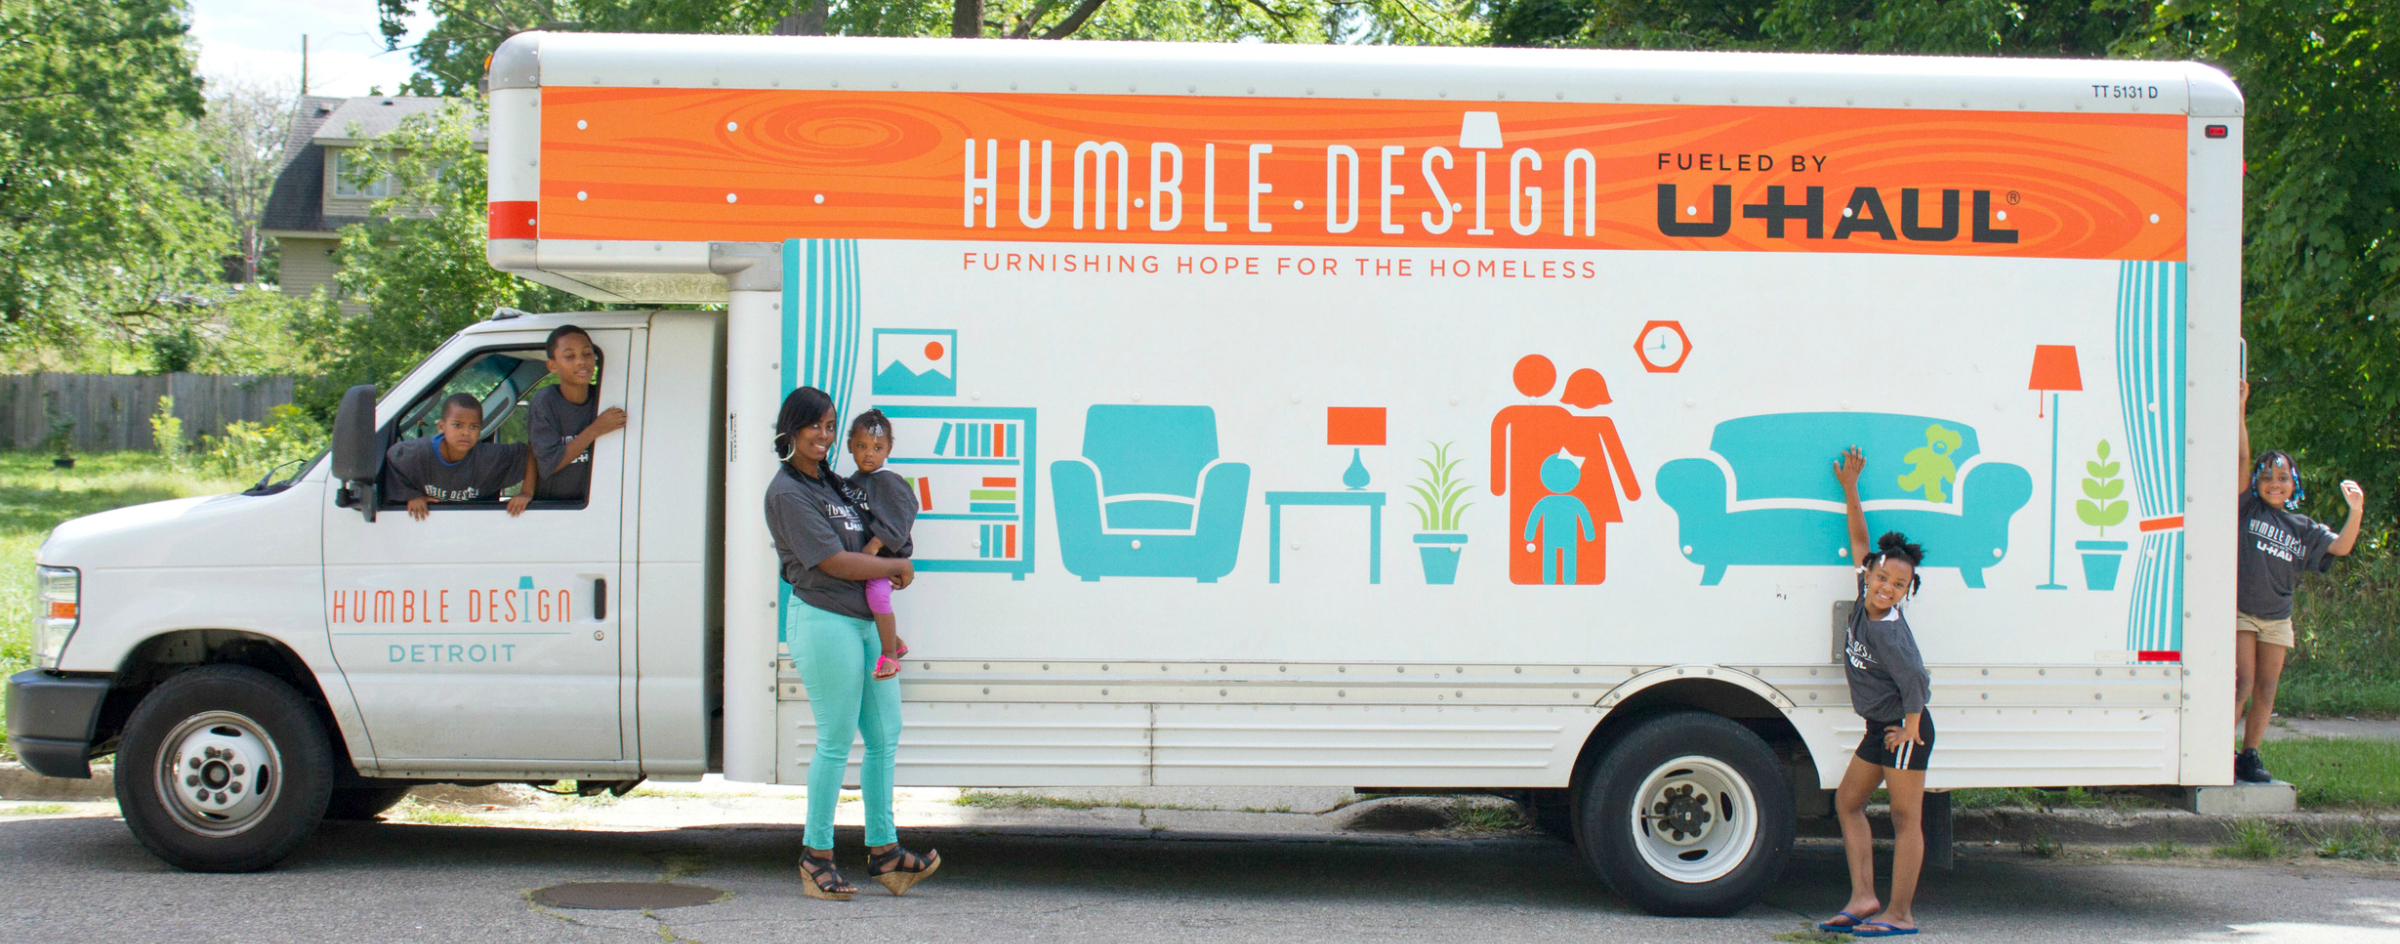 U-Haul and Humble Design to Furnish Homes for Formerly Homeless Families